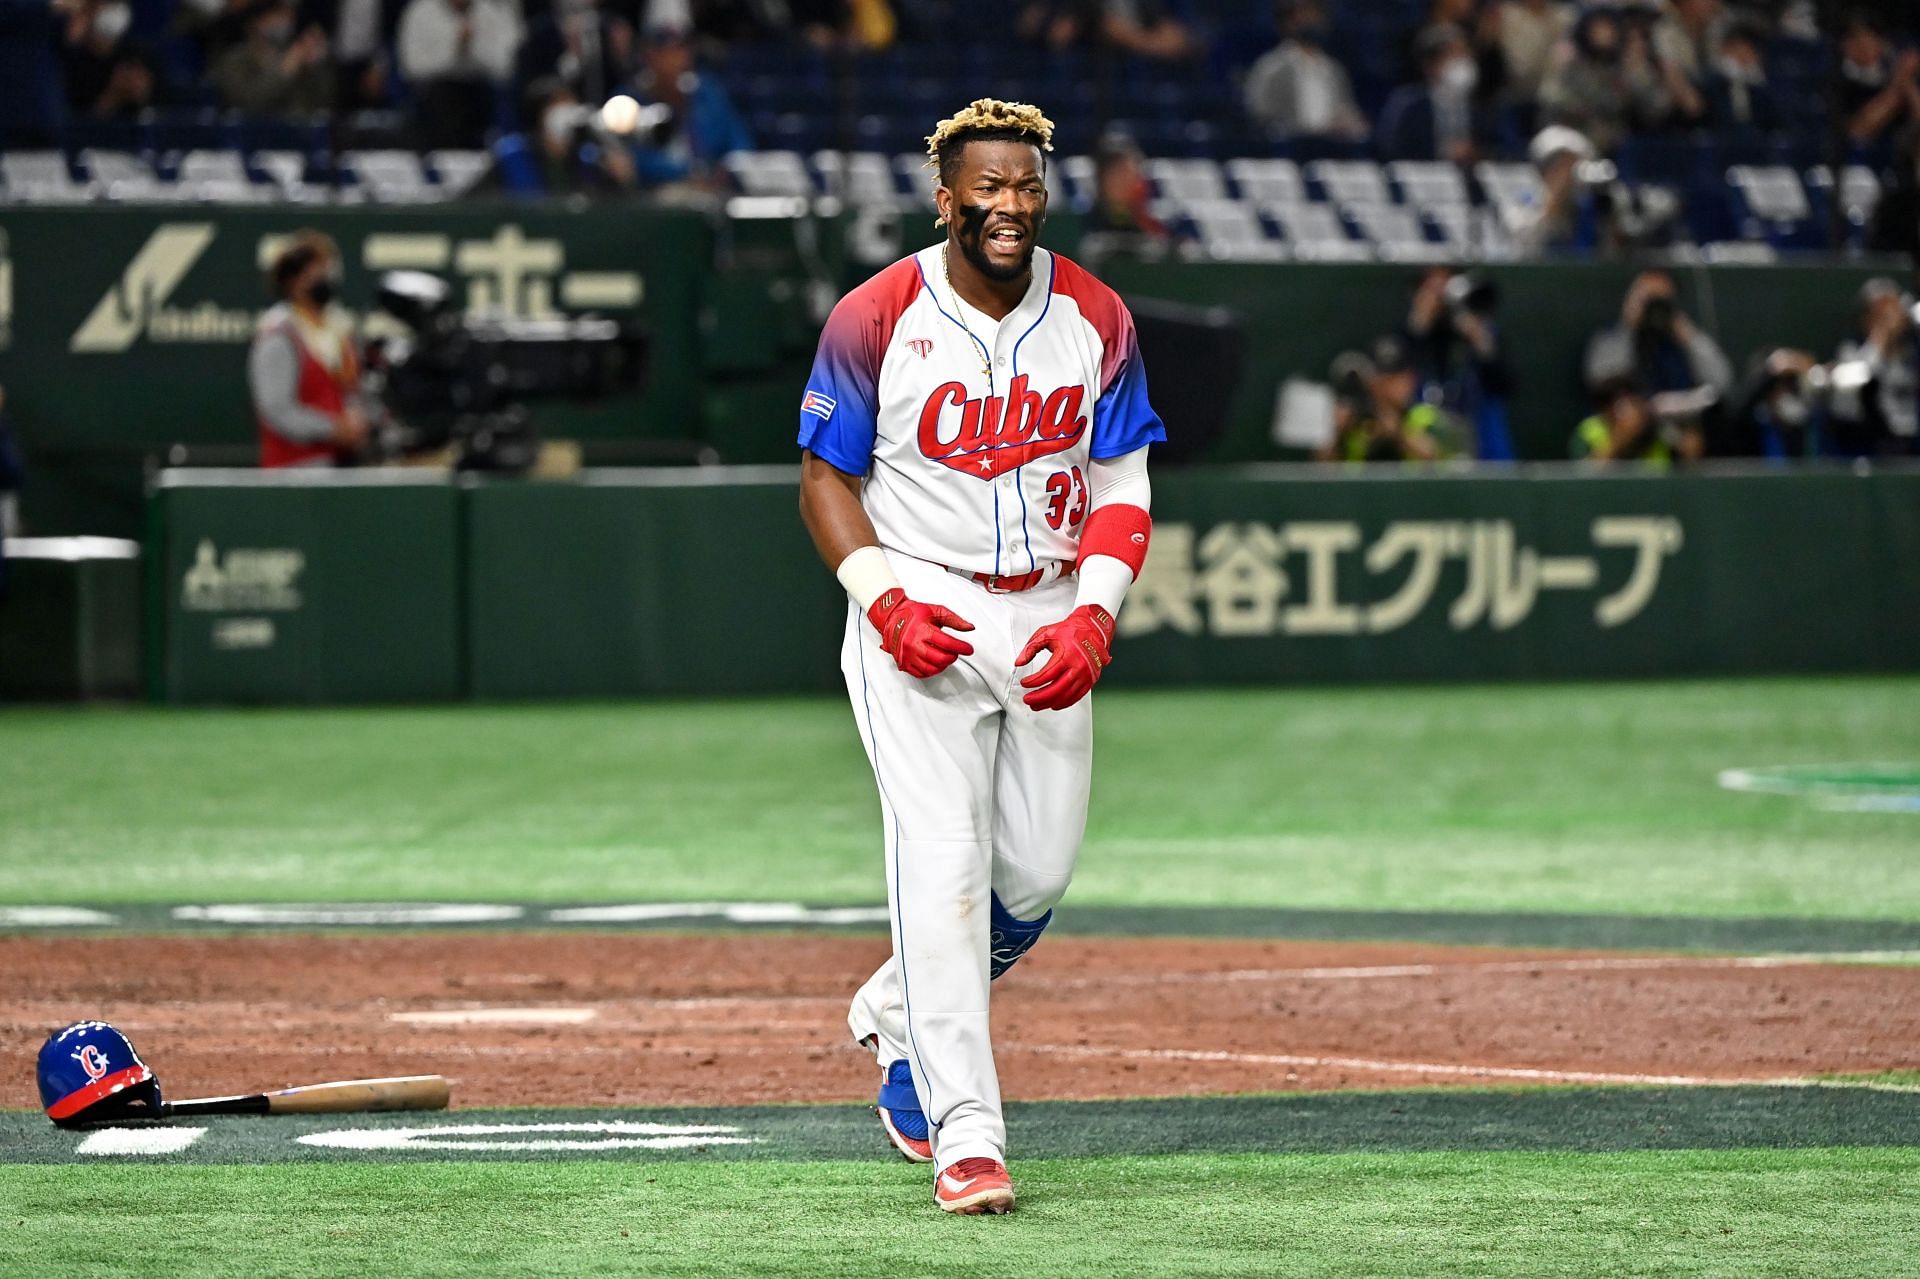 Cuba gets past Australia to reach World Baseball Classic semifinals - The  Japan Times